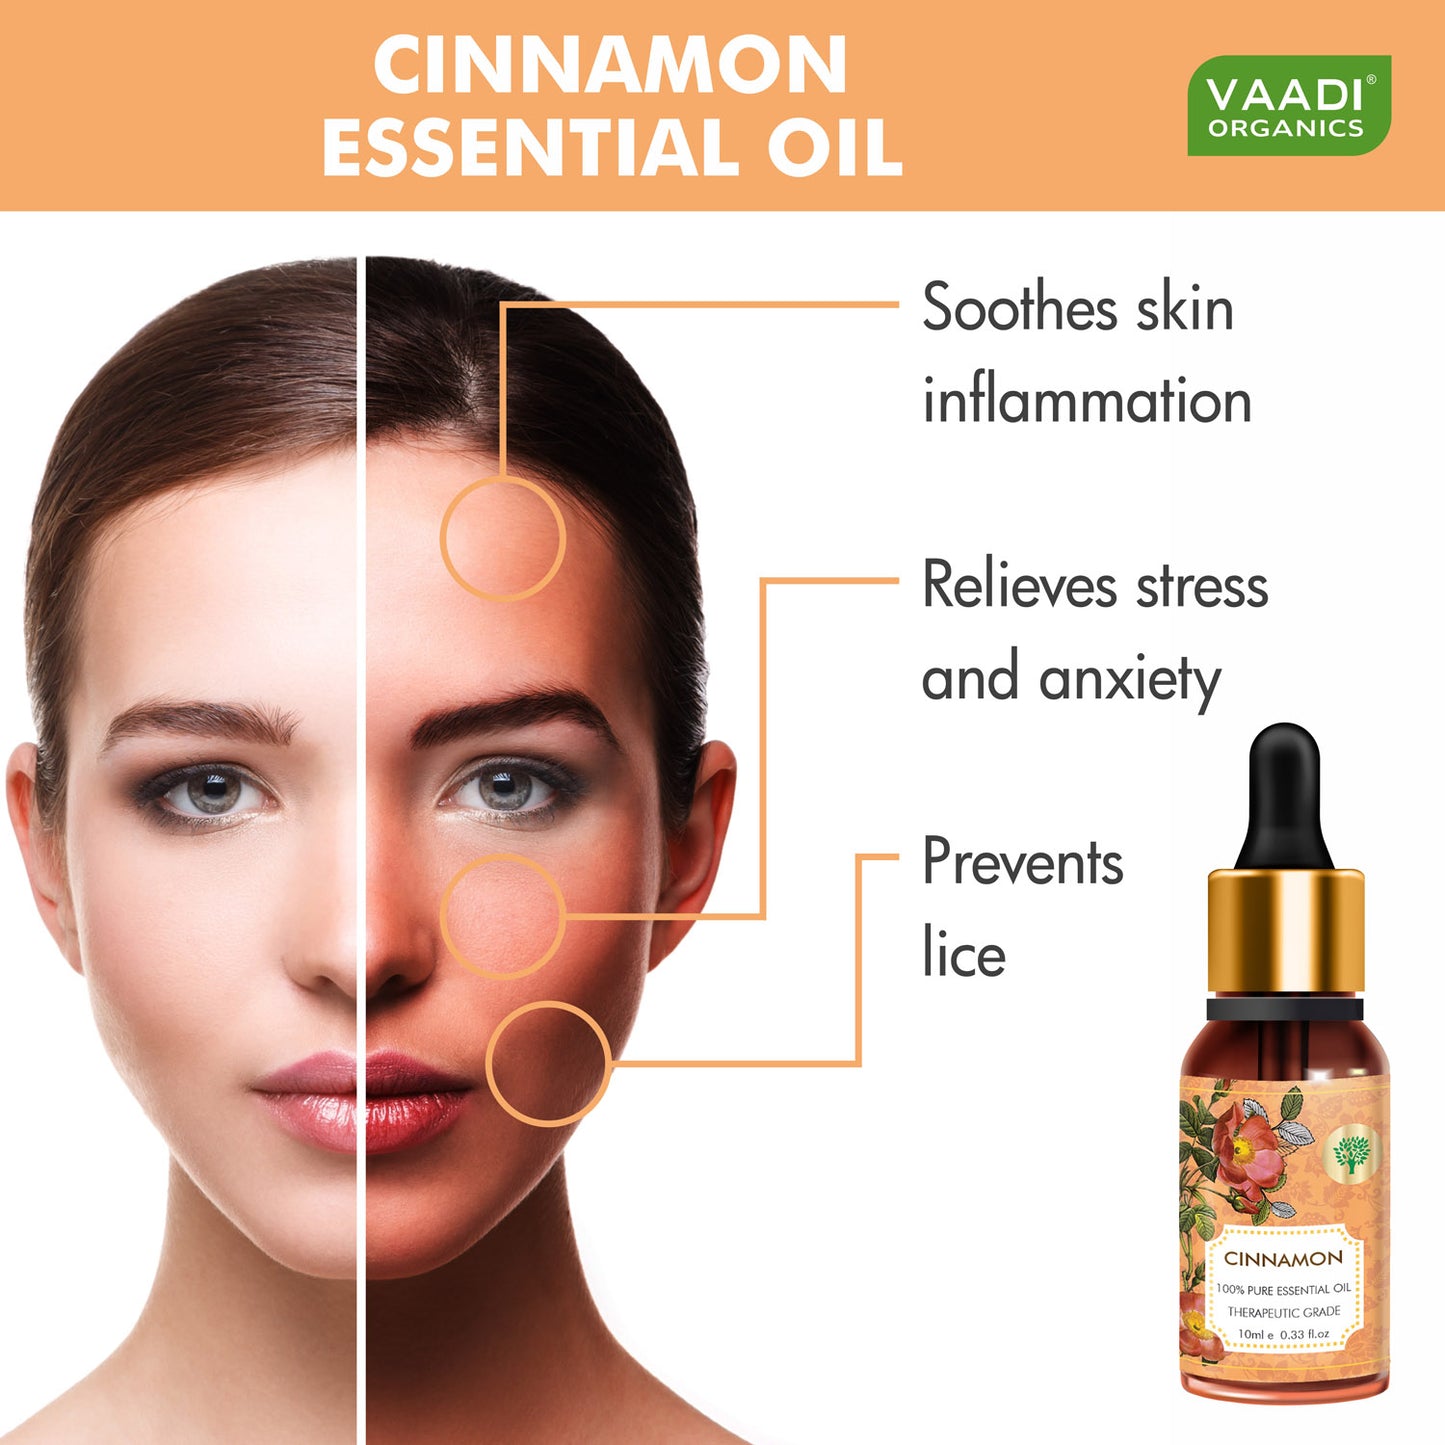 Cinnamon Essential Oil - Soothes Skin Inflammation, Relieves Stress & Anxiety & Improves Concentration - 100% Pure Therapeutic Grade (10 ml)